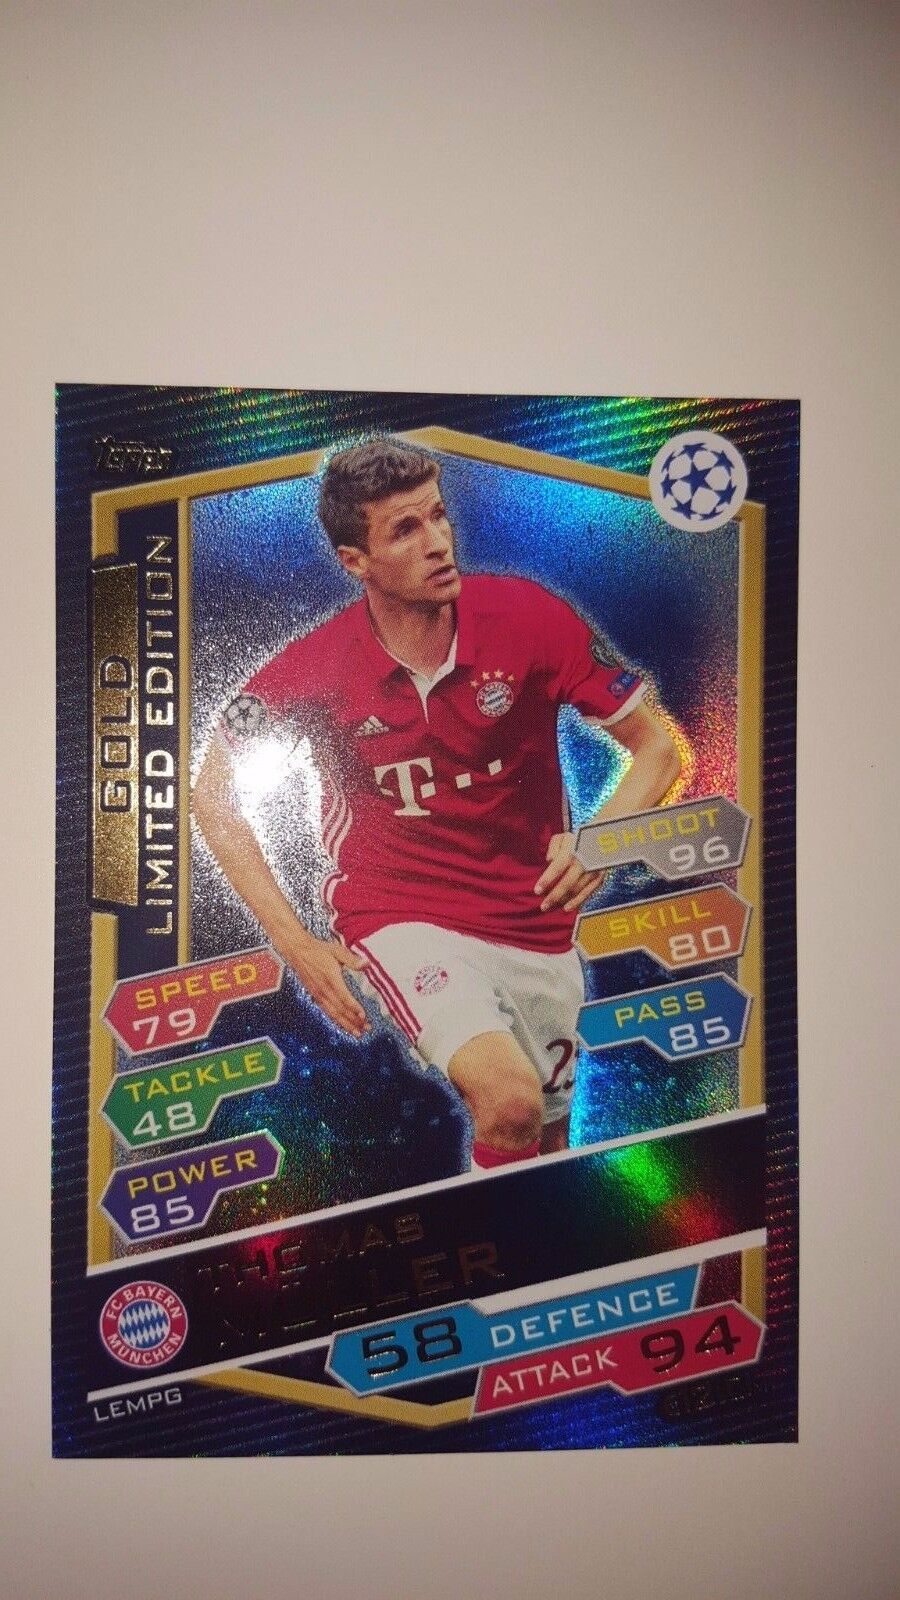 Match Attax Champions League 16 17 limited exclusive Nordic edition Pro 11 Hero